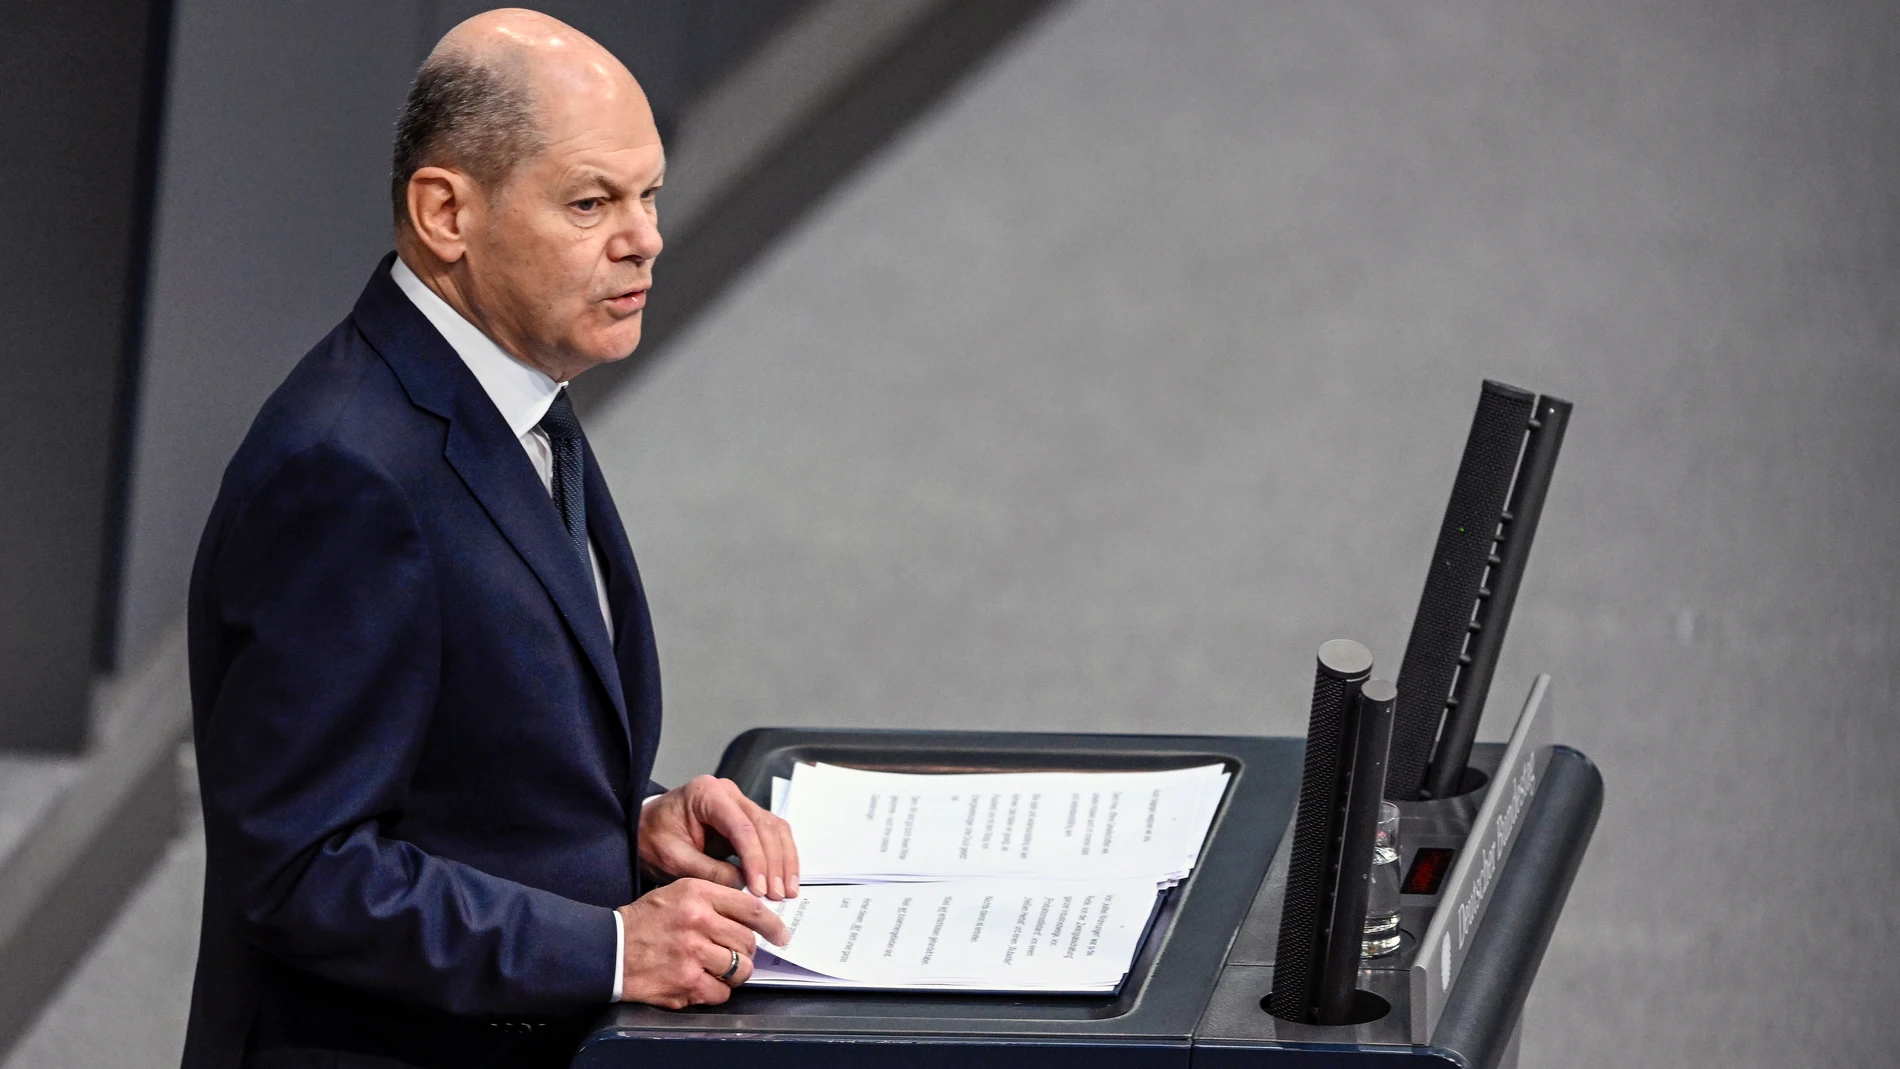 Berlin (Germany), 02/03/2023.- German Chancellor Olaf Scholz delivers a statement 'A Year of Changing Times - Strengthening Germany's Security and Alliances, Continuing to Support Ukraine' at the German parliament Bundestag in Berlin, Germany, 02 March 2023. The government statement will be followed by a debate. (Alemania, Ucrania) EFE/EPA/FILIP SINGER